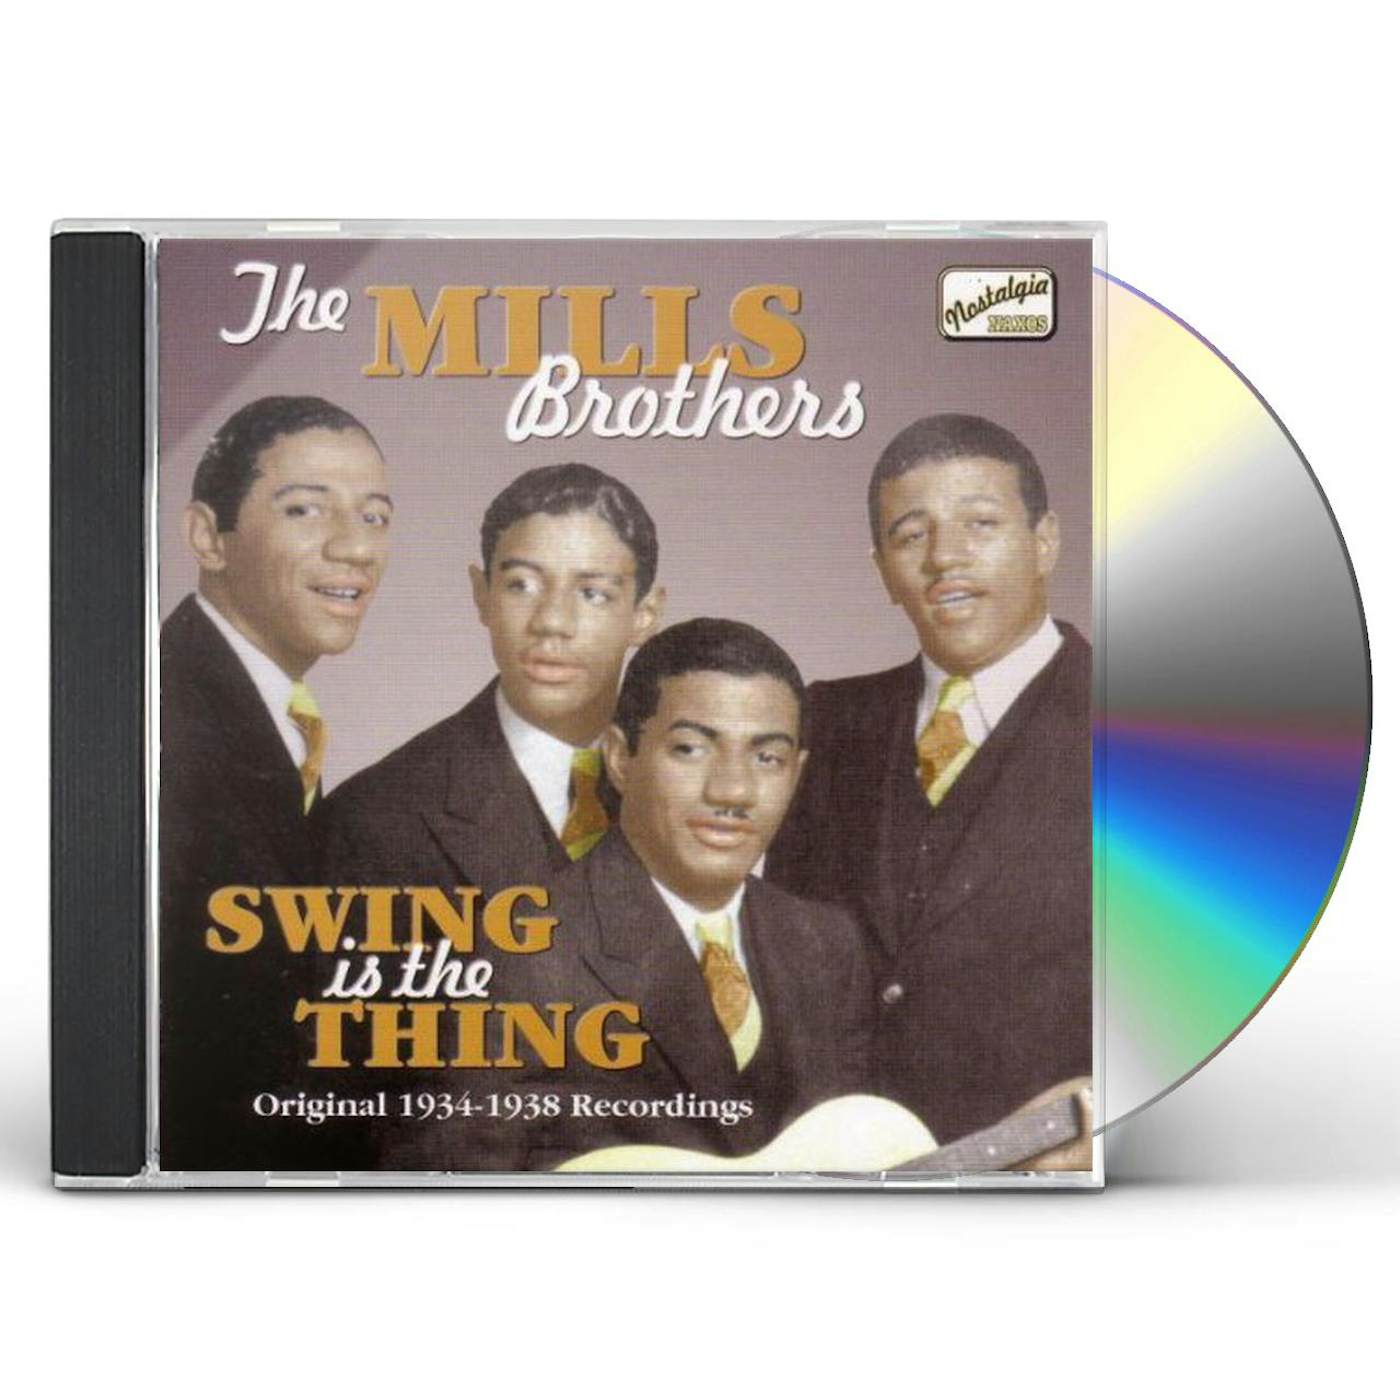 The Mills Brothers SWING IS THE THING (1934-38) CD